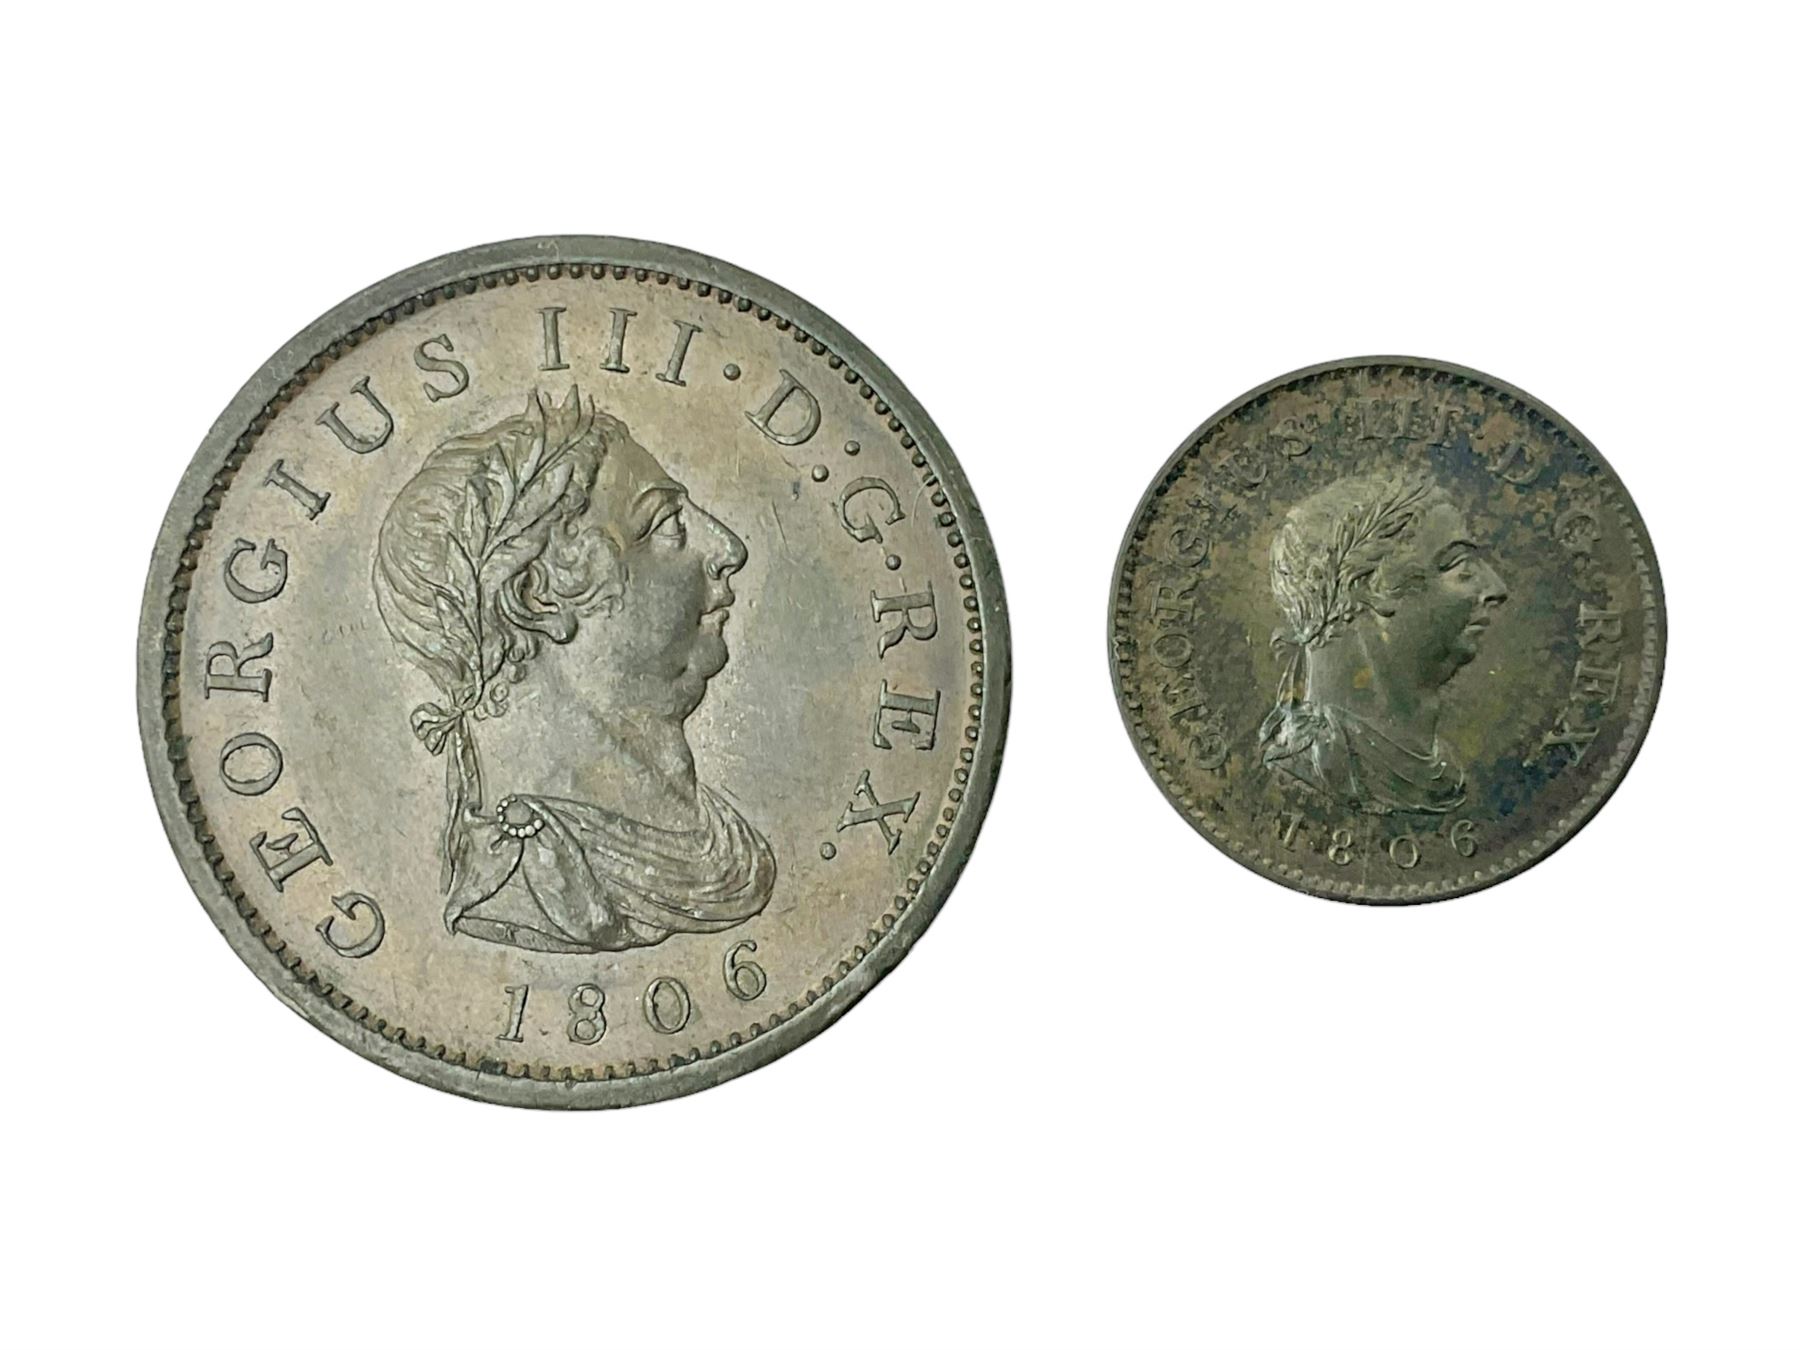 George III 1806 penny and halfpenny coins